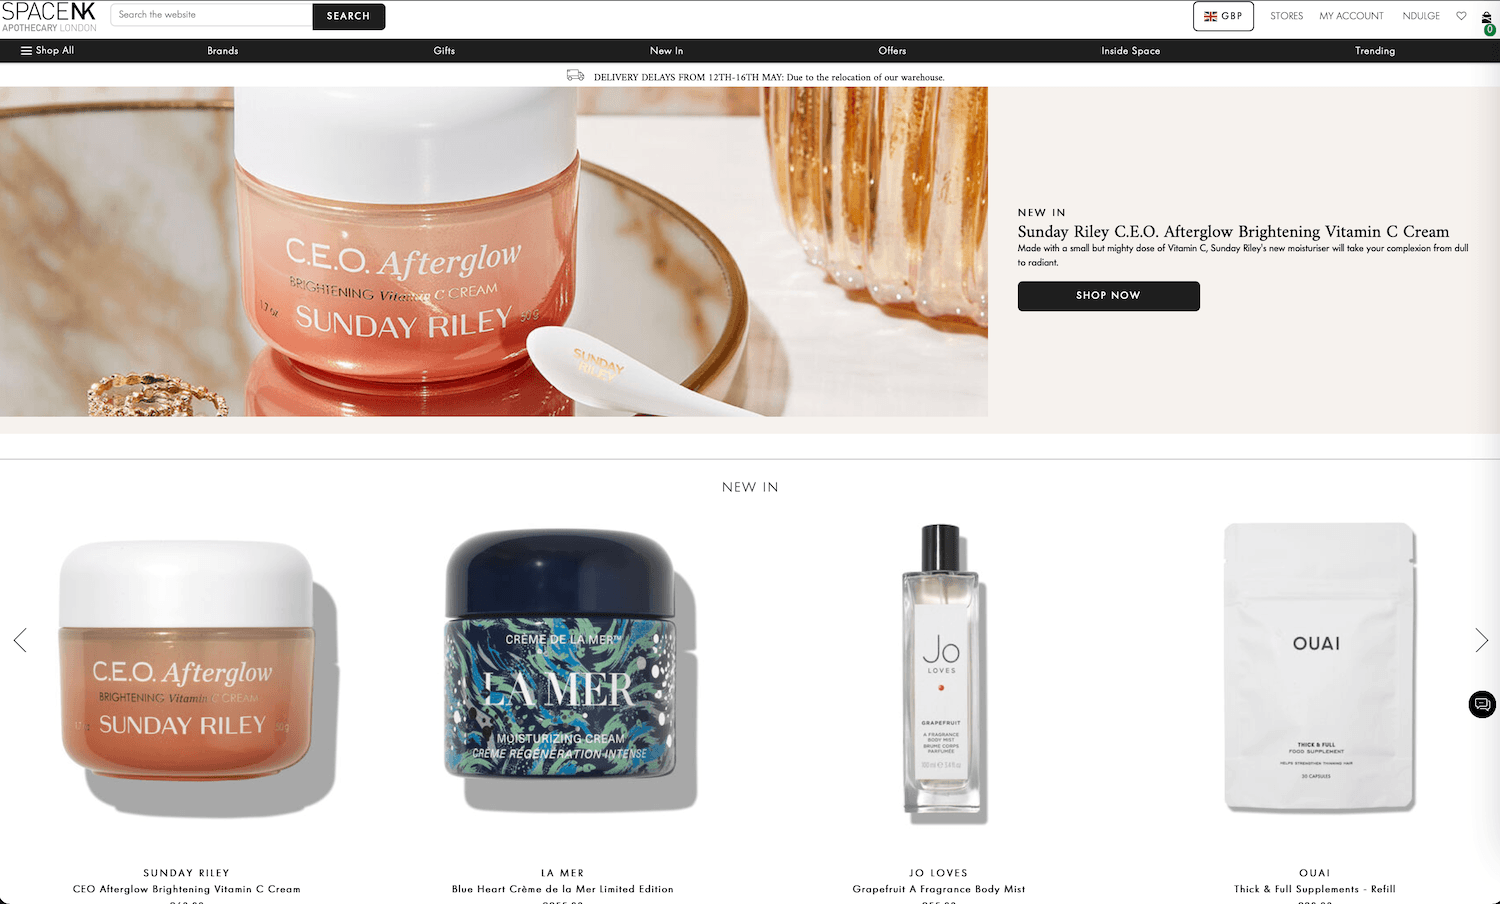 Space NK creates a buzz around top-rated products by highlighting them on their homepage. 